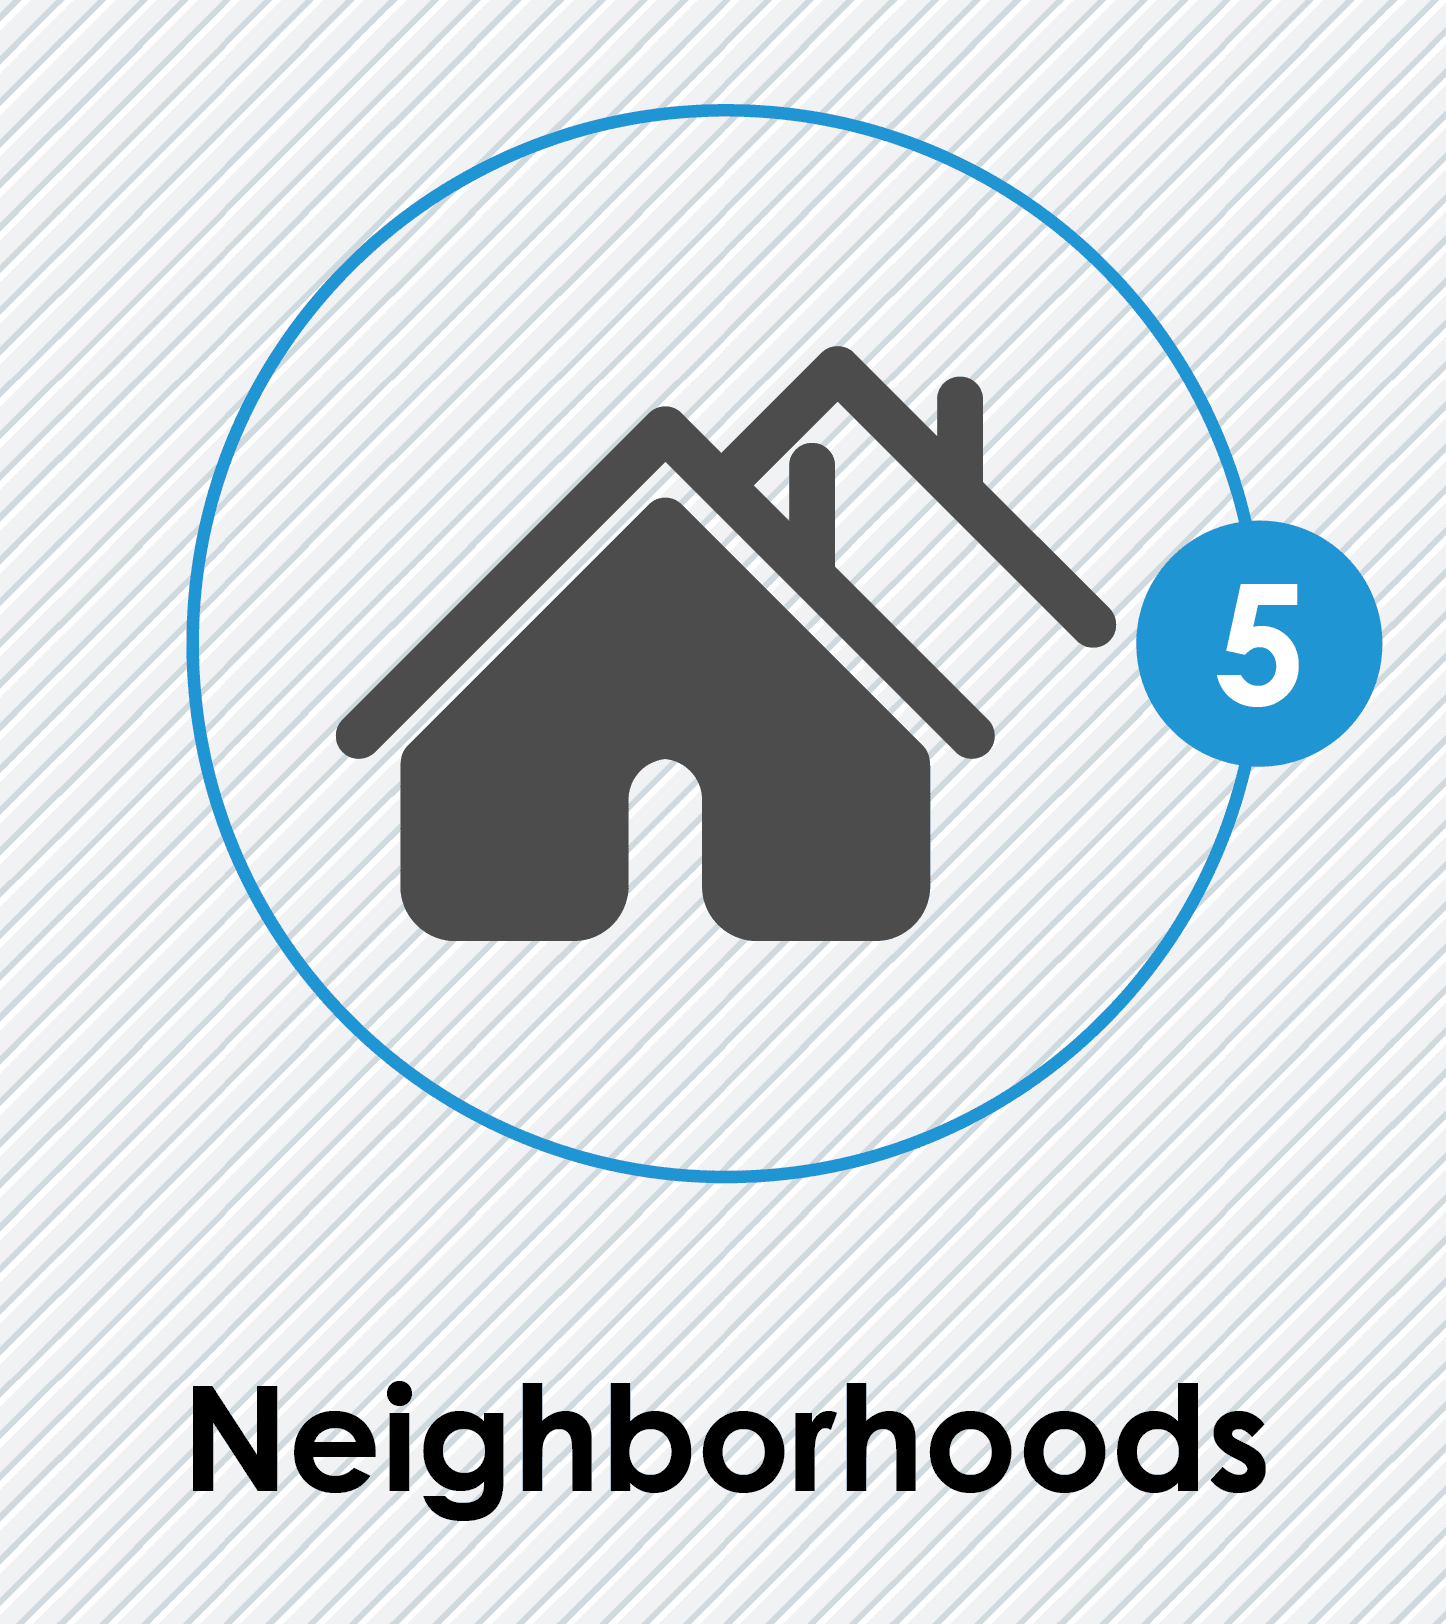 Learn about neighborhoods before buying a home in Charlotte NC